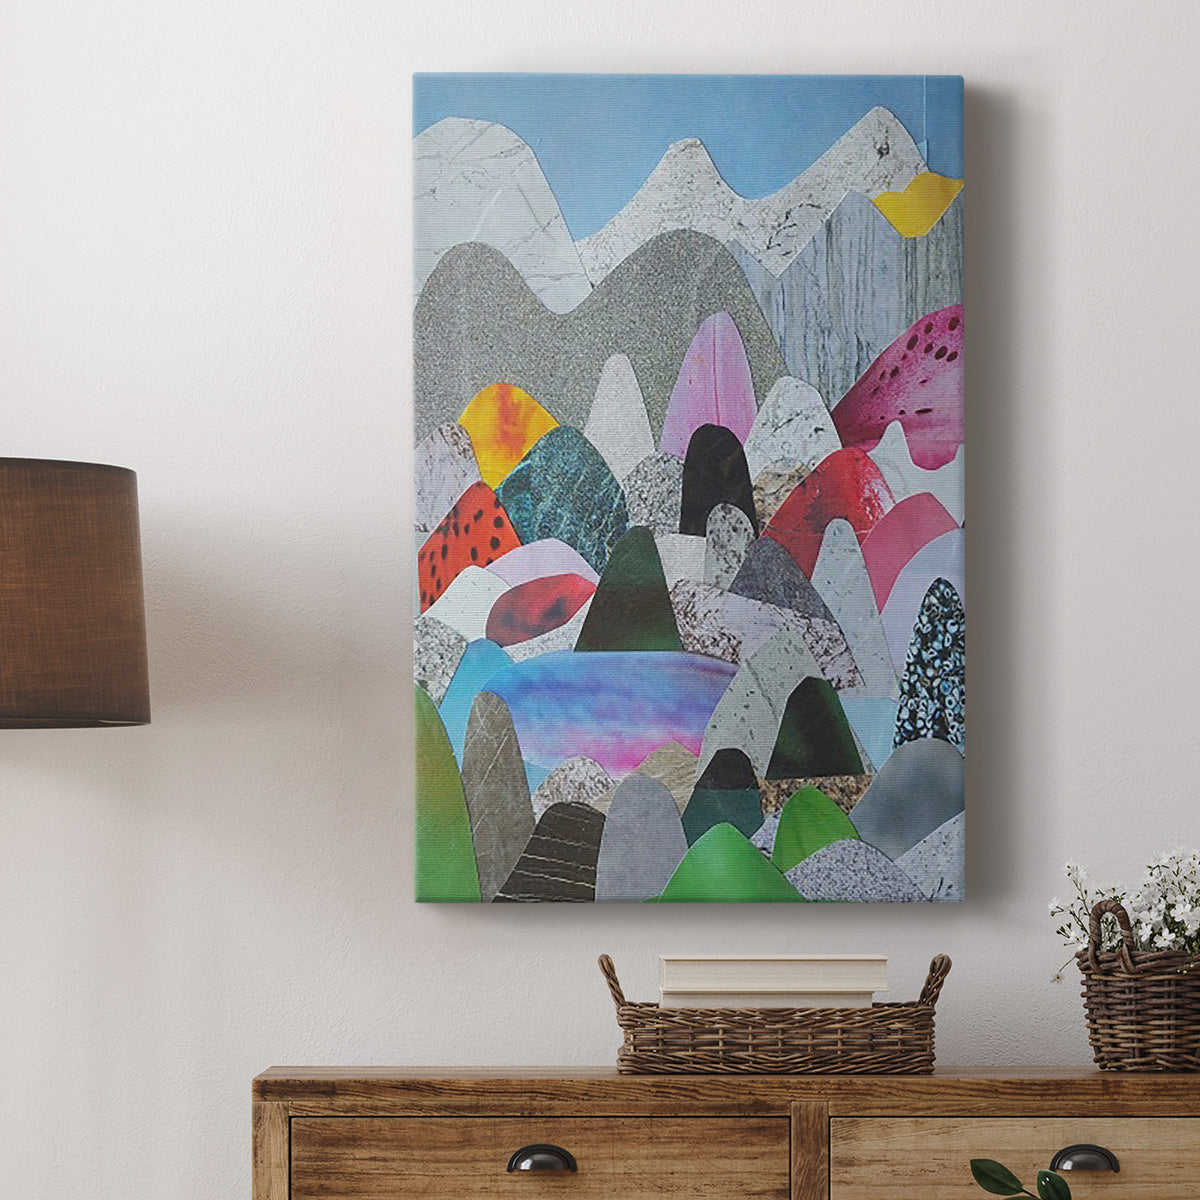 Utah Mountains Premium Gallery Wrapped Canvas - Ready to Hang